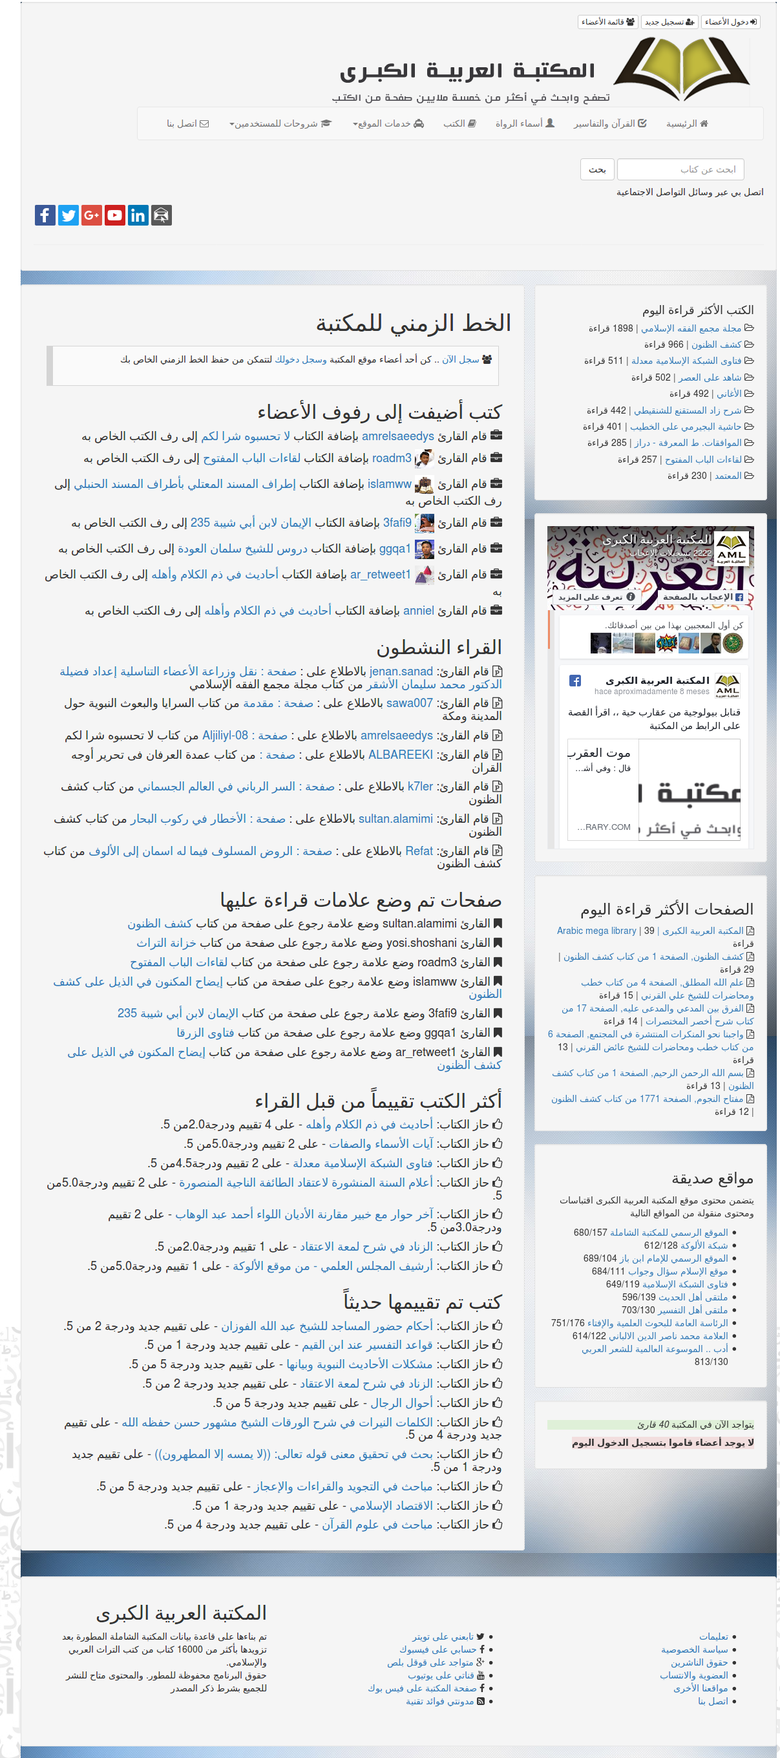 Adding some features and modules to Arabic Library.